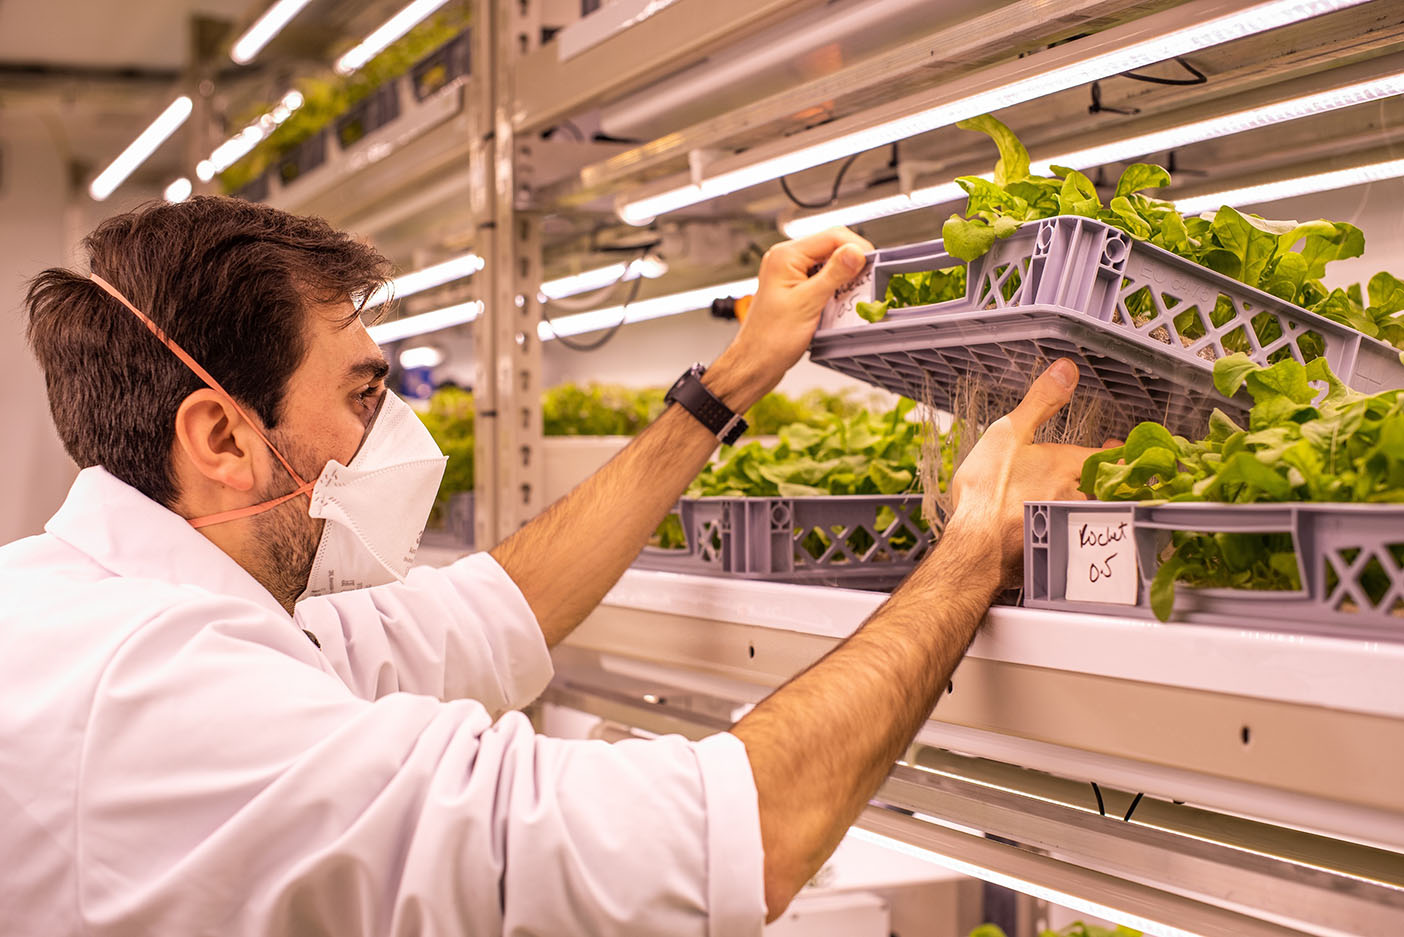 Ricardo Lopes, Research Scientist at LettUs Grow and research lead on the project, checking on plants in the aeroponic vertical farm